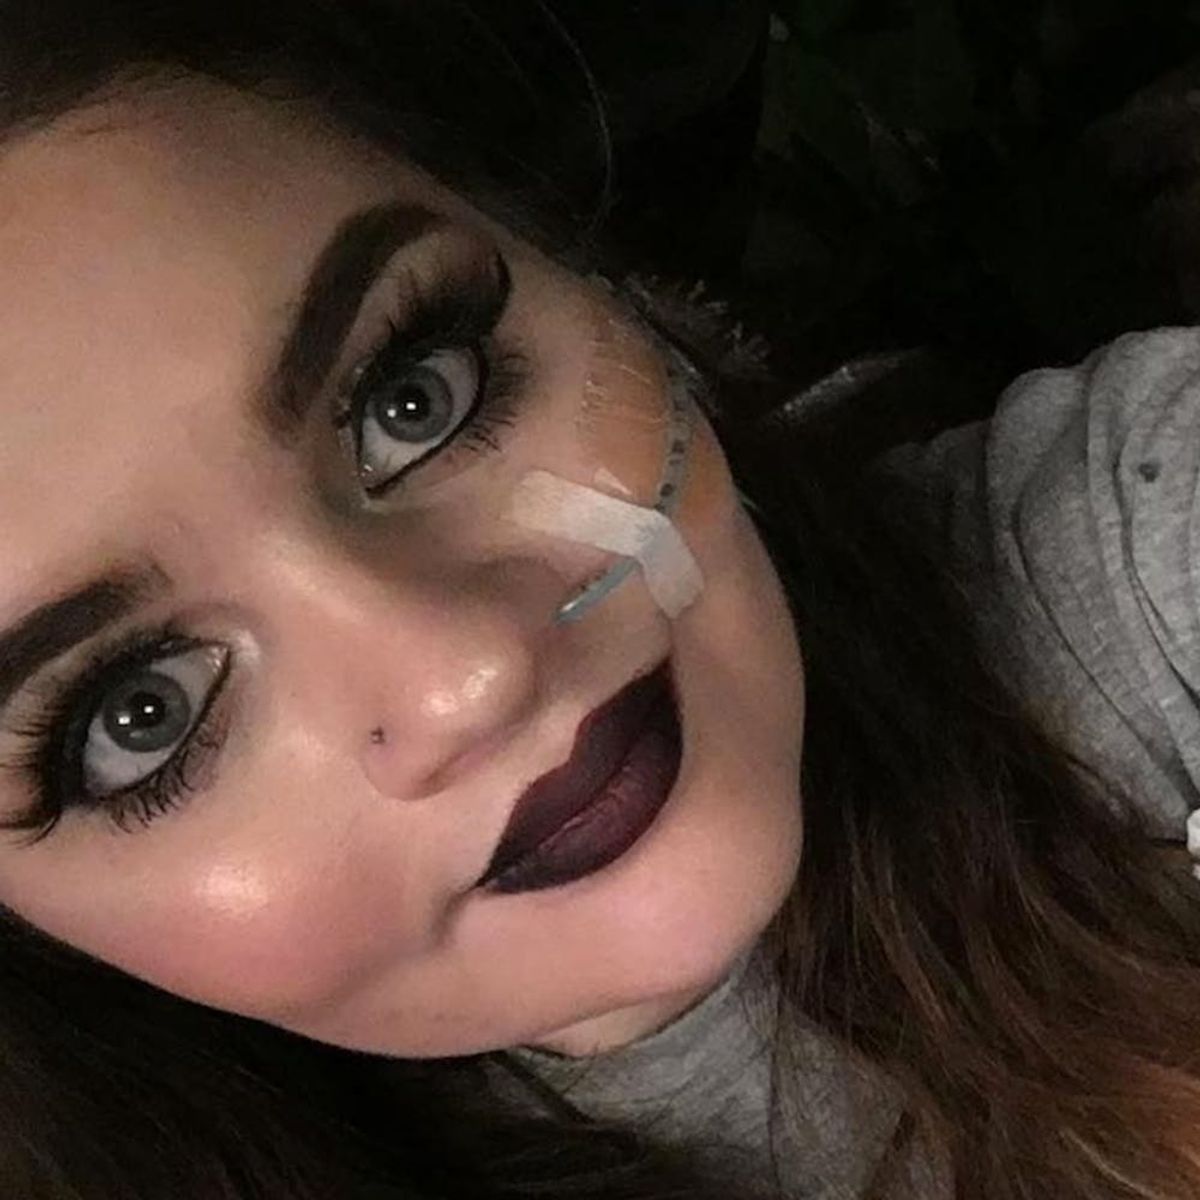 This Aspiring Makeup Artist Isn’t Letting Her Feeding Tube Stop Her Dreams